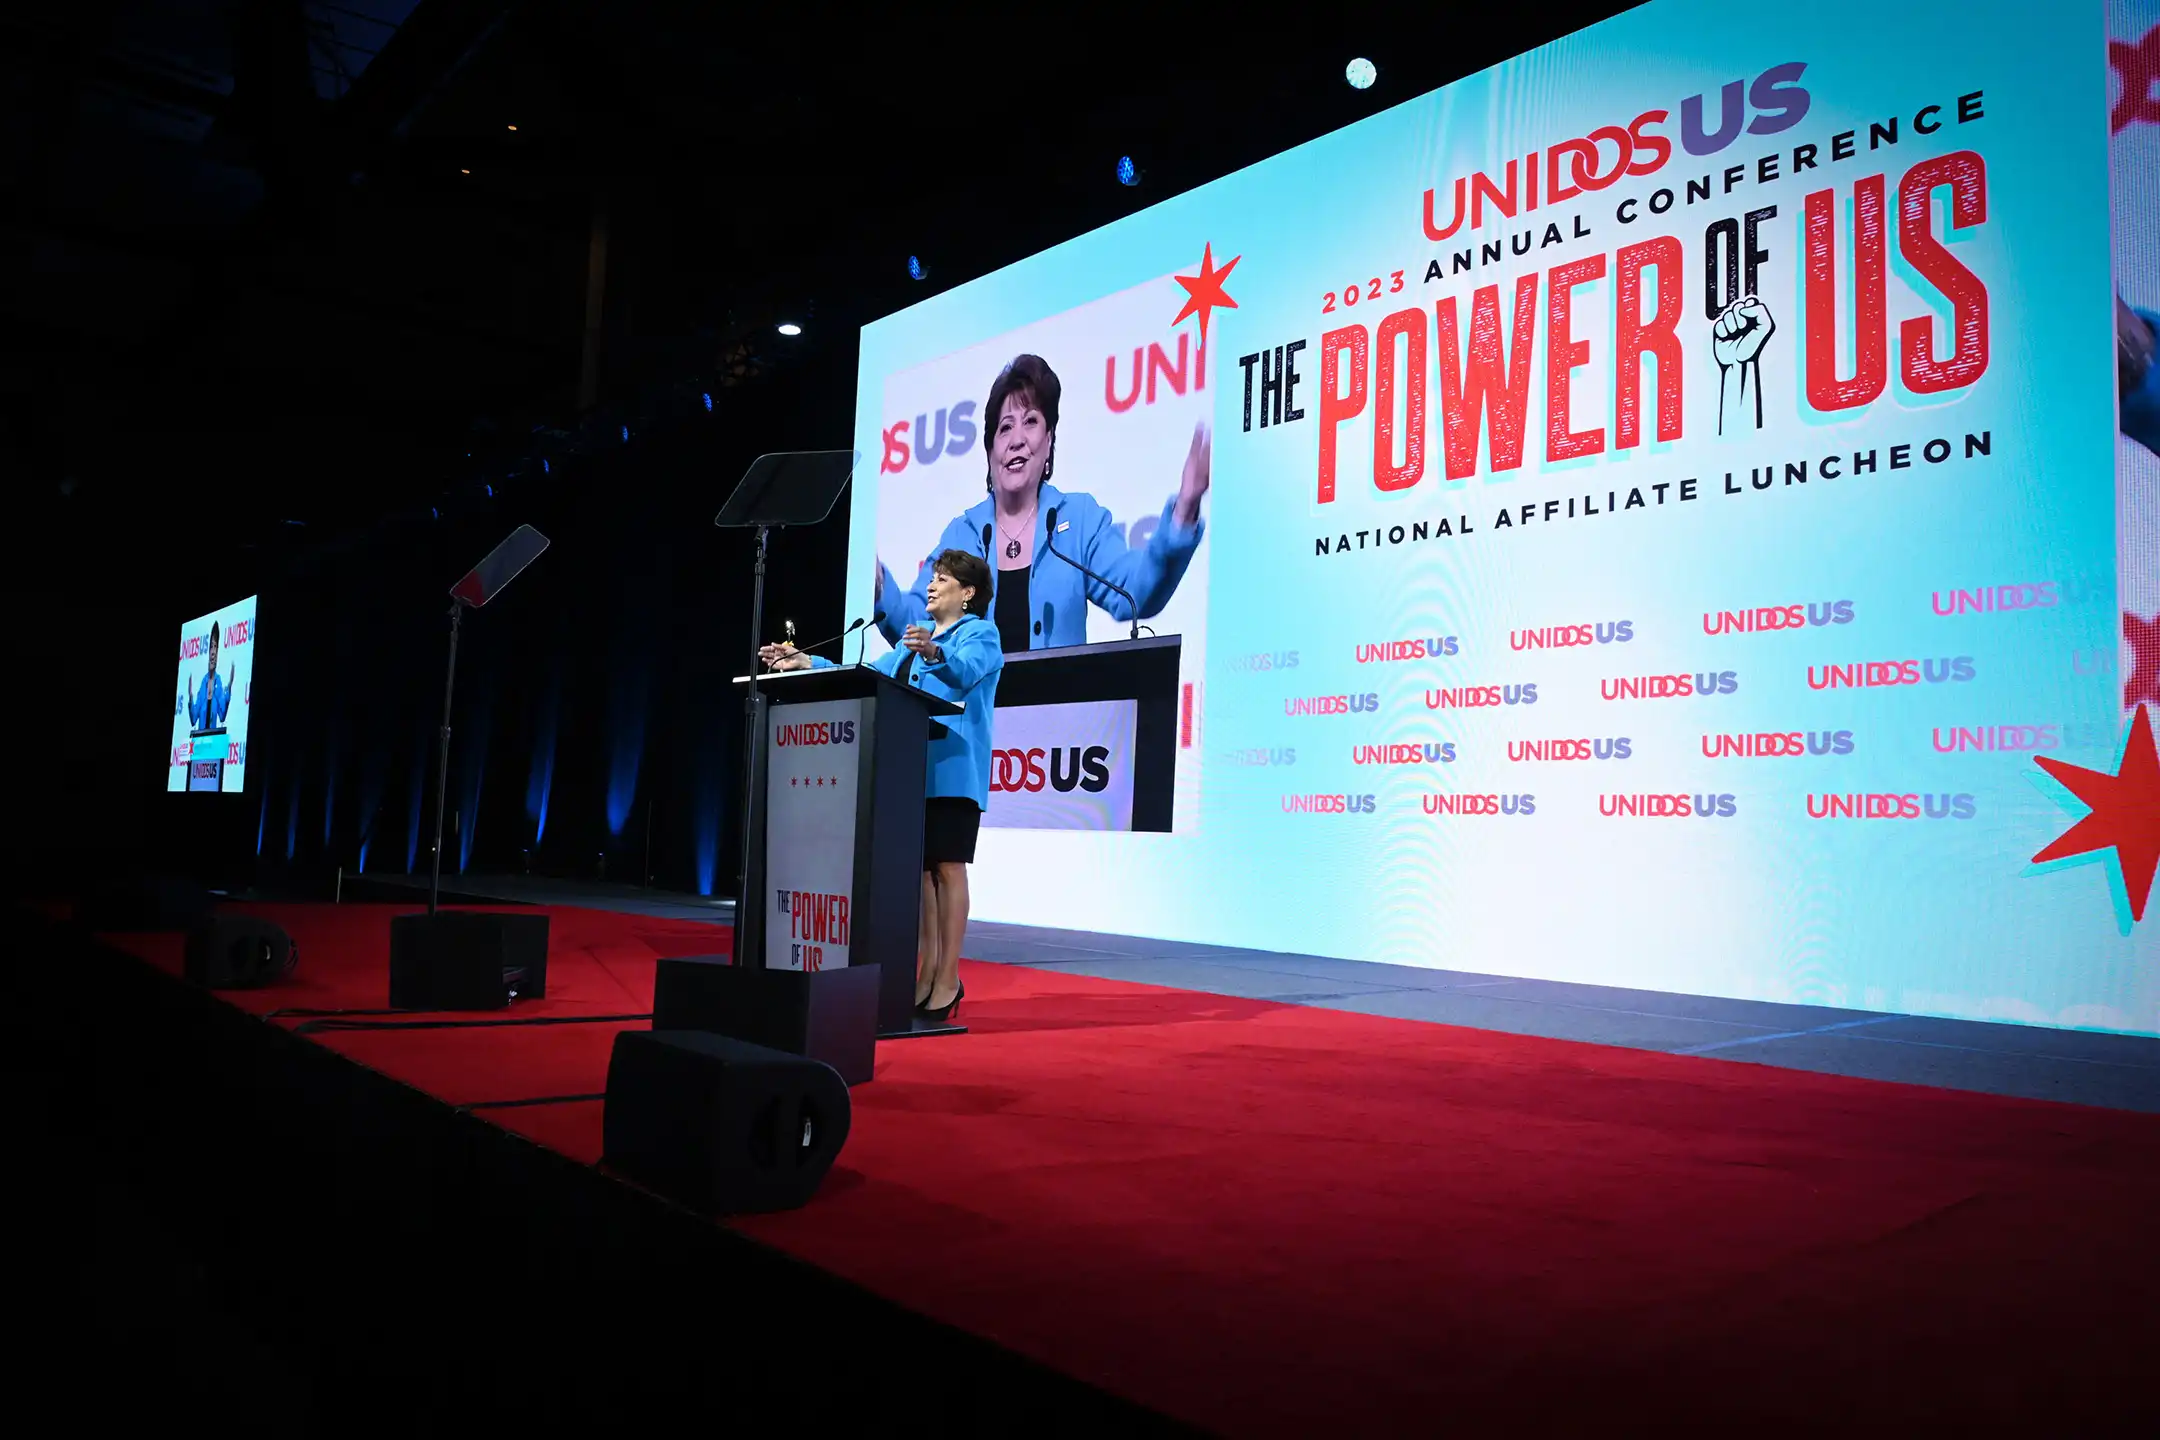 UnidosUS President and CEO Janet Murguía delivering a speech at the 2023 UnidosUS Annual Conference in Chicago, IL.